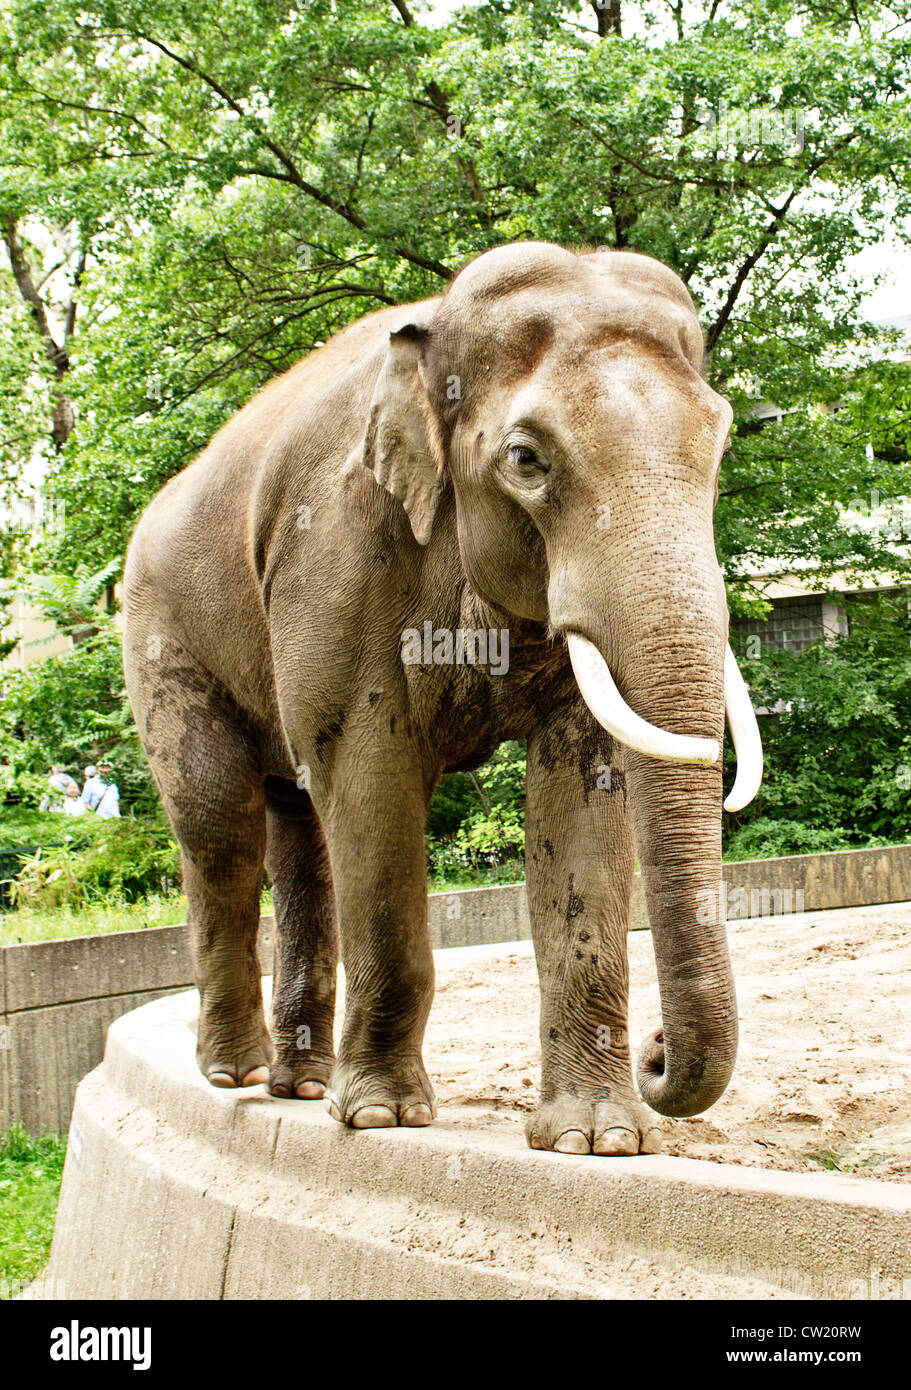 Male asian elephant is walking on the edge of his territory in Zoo garden Stock Photo